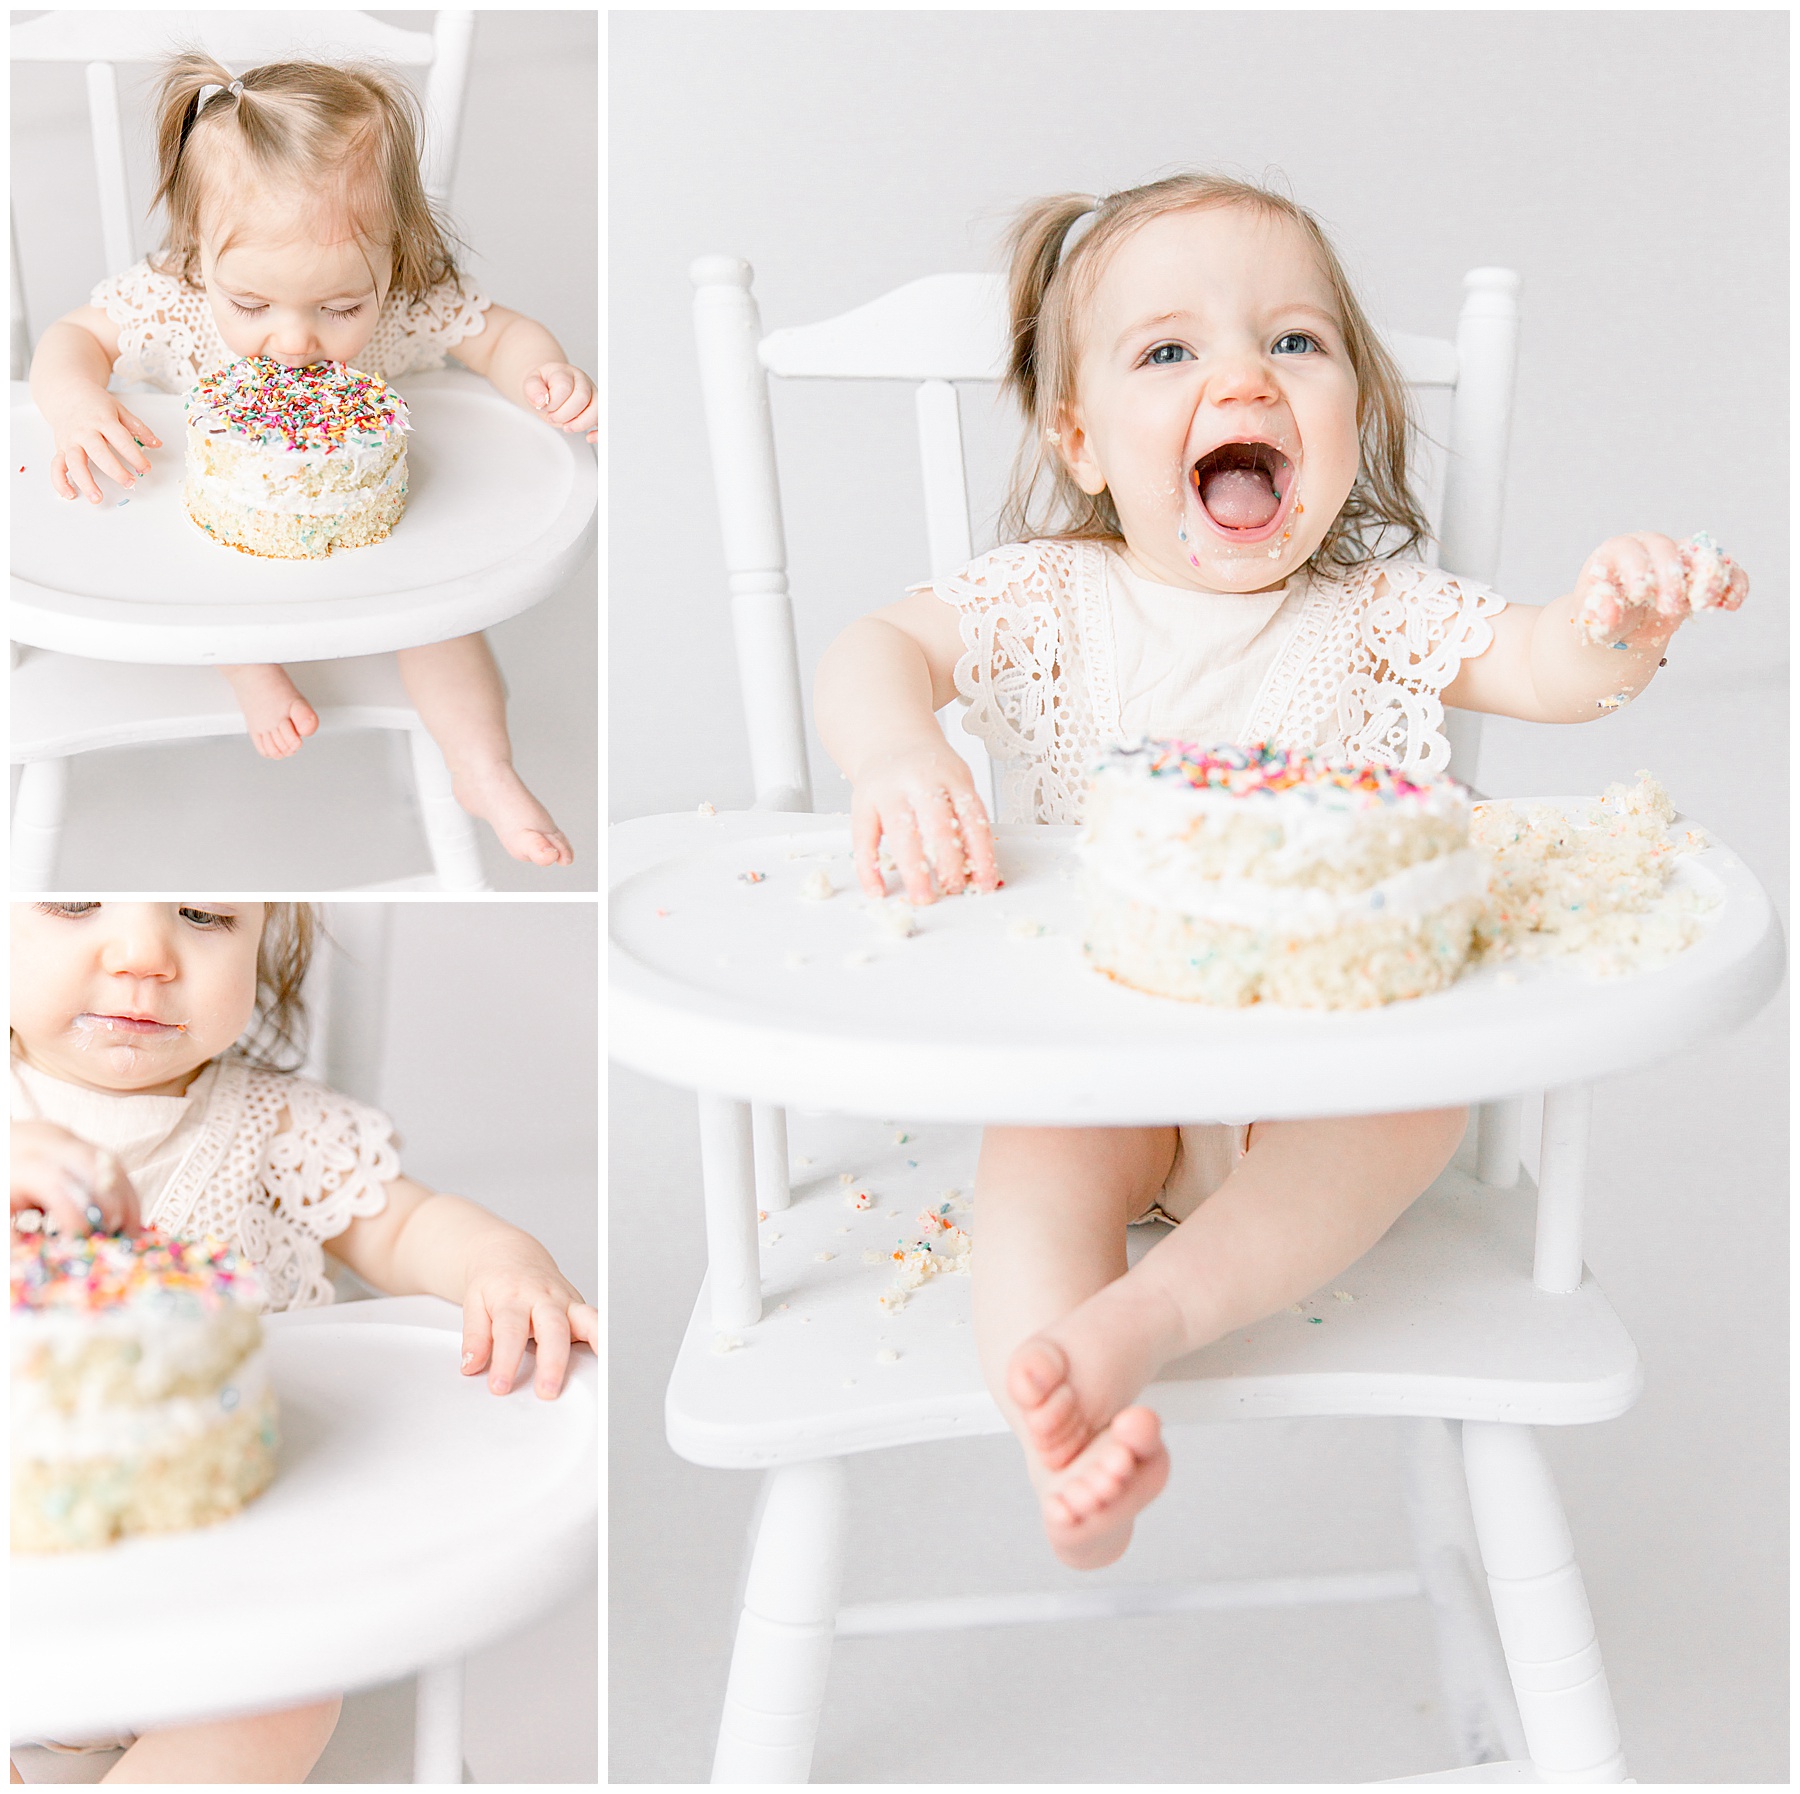 Baby girl eating cake during studio milestone session by Charlotte Baby Photographer Katie Petrick Photography